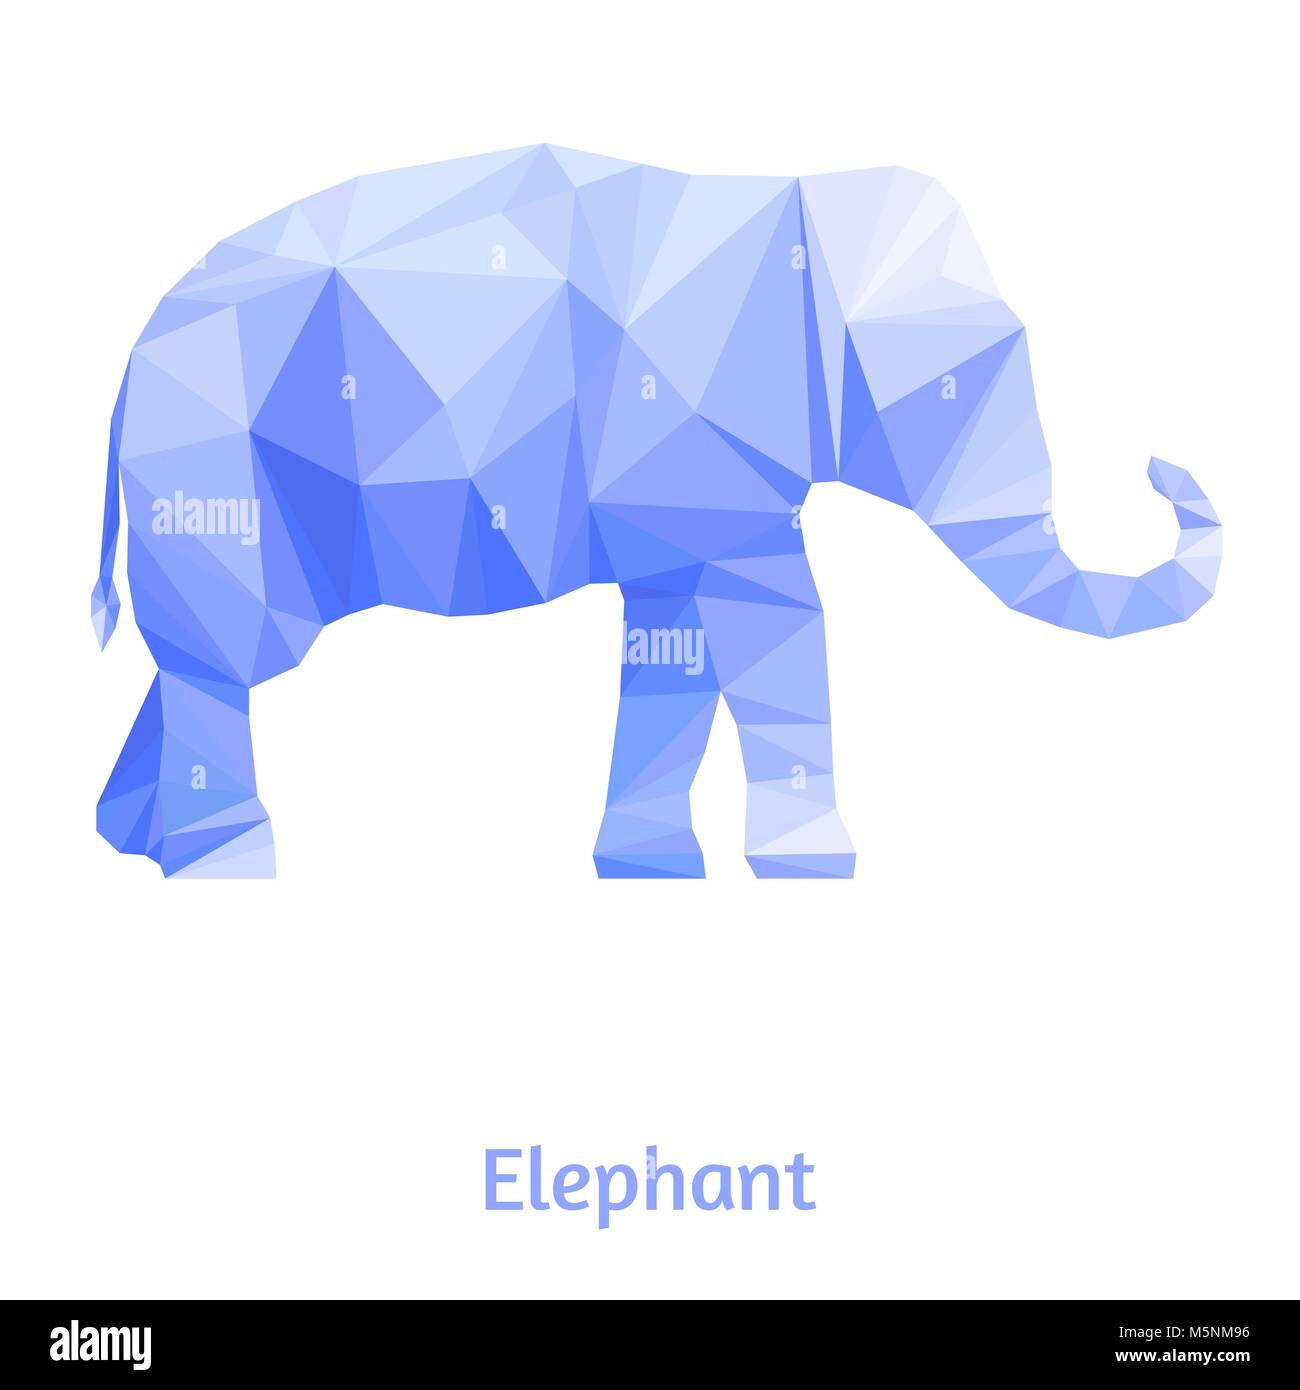 Stylized elephant isolated on a white background. Made in low poly triangular style. Vector. Stock Vector